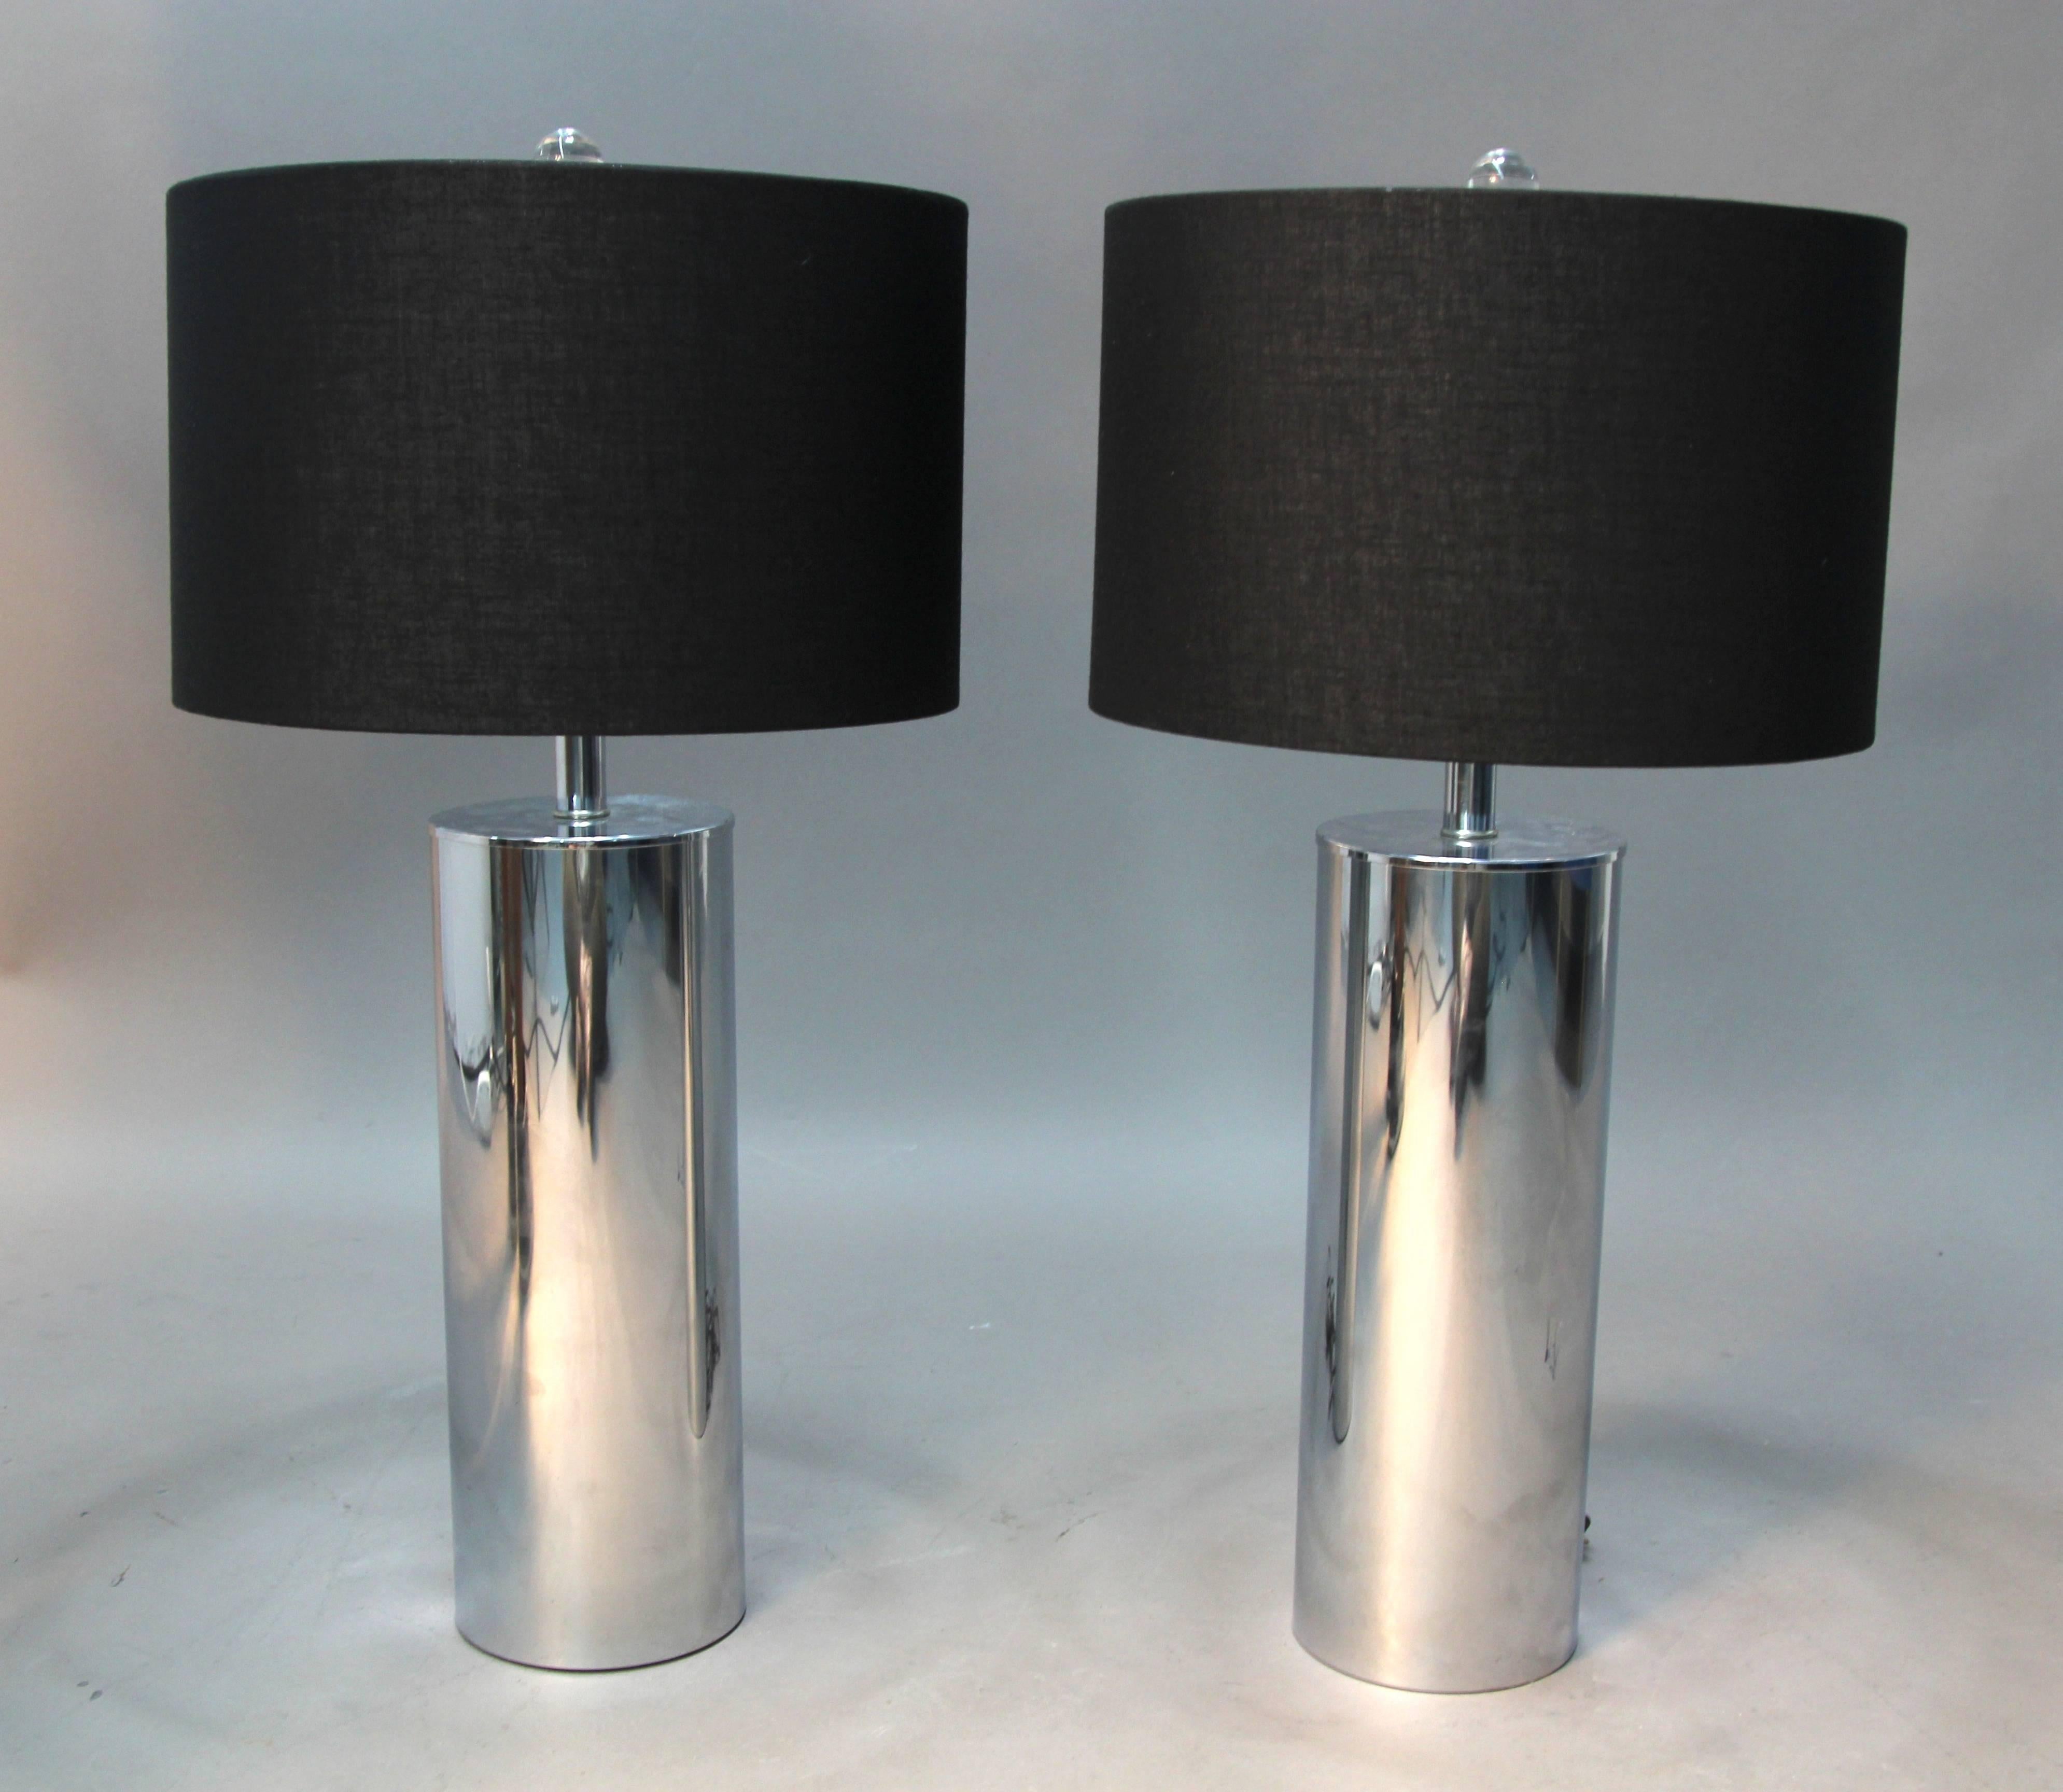 Gorgeous pair of chrome tube lamps, or lipstick tube lamps. Black fabric shades with silver lining and Lucite finials. Incredible Mid-Century lighting example.